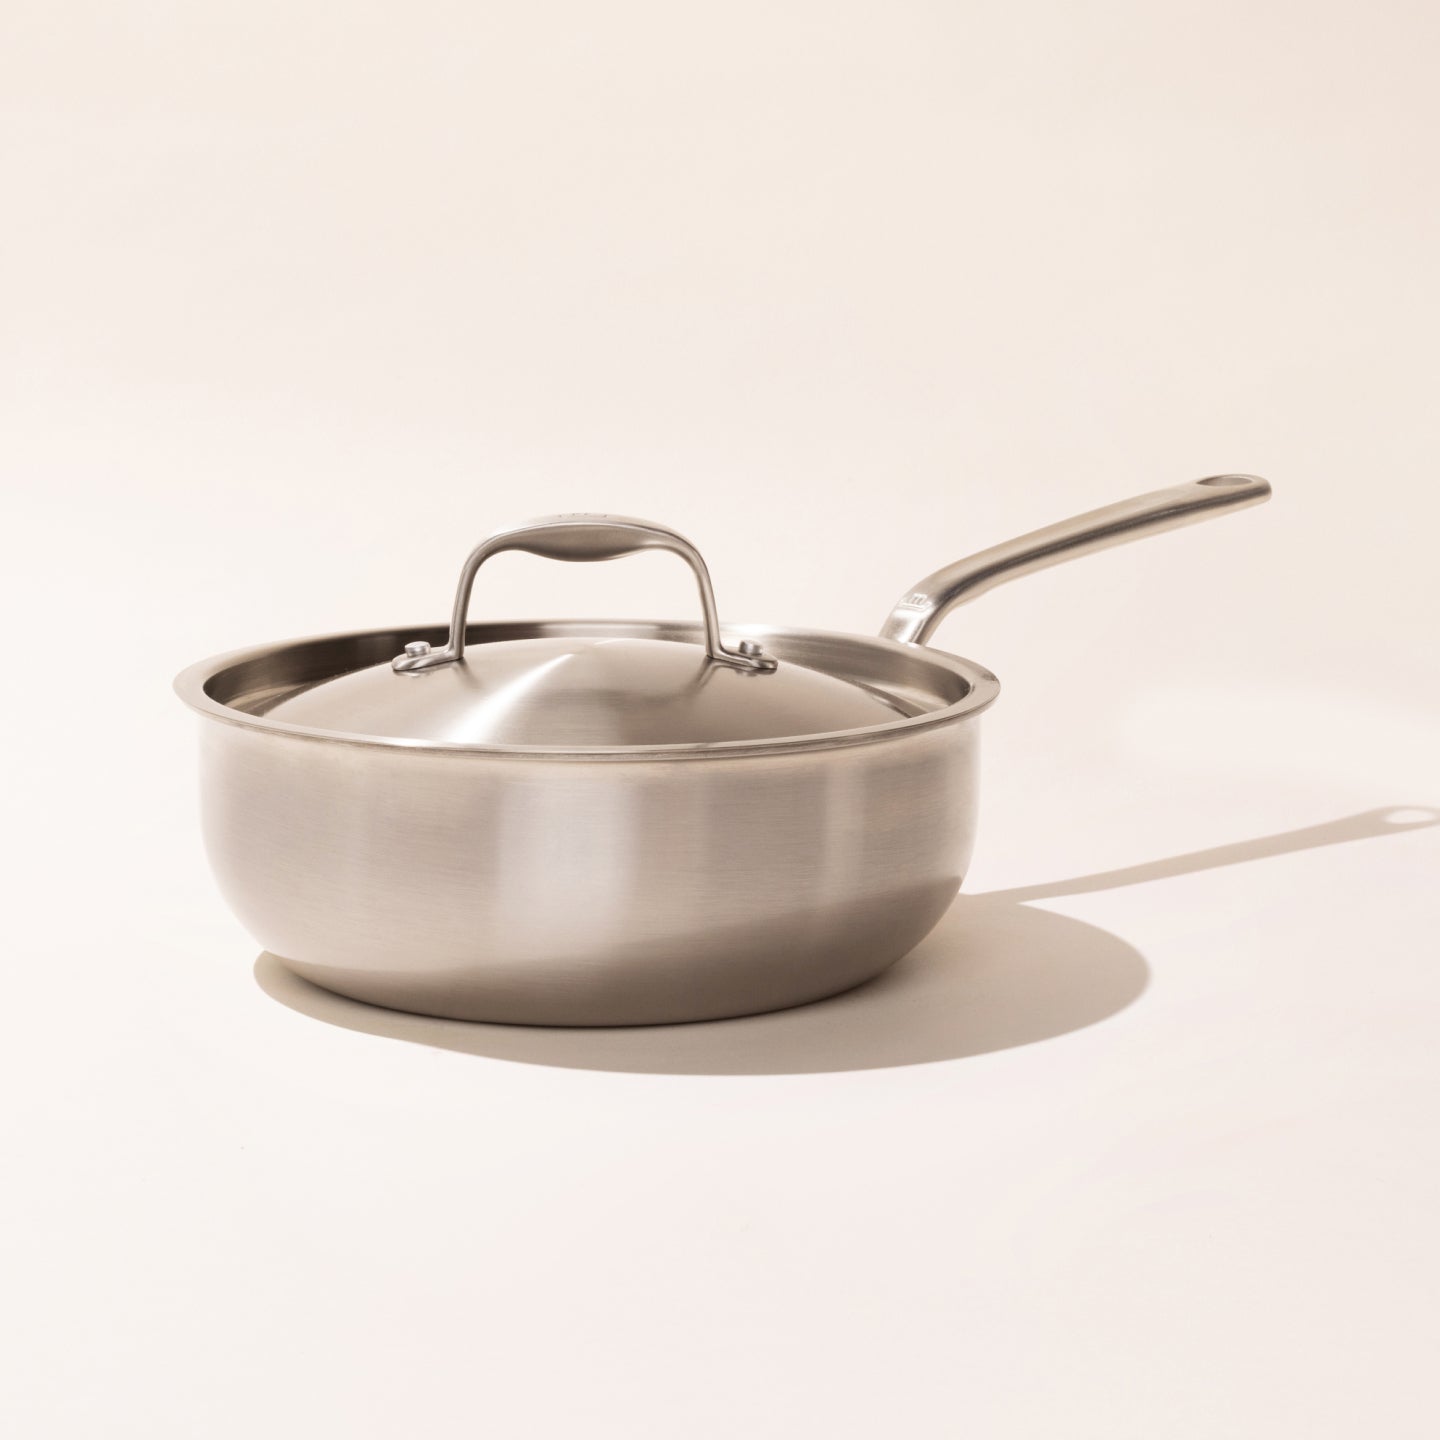 American Kitchen Cookware - 3 Qt. Covered Saucepan / Stainless